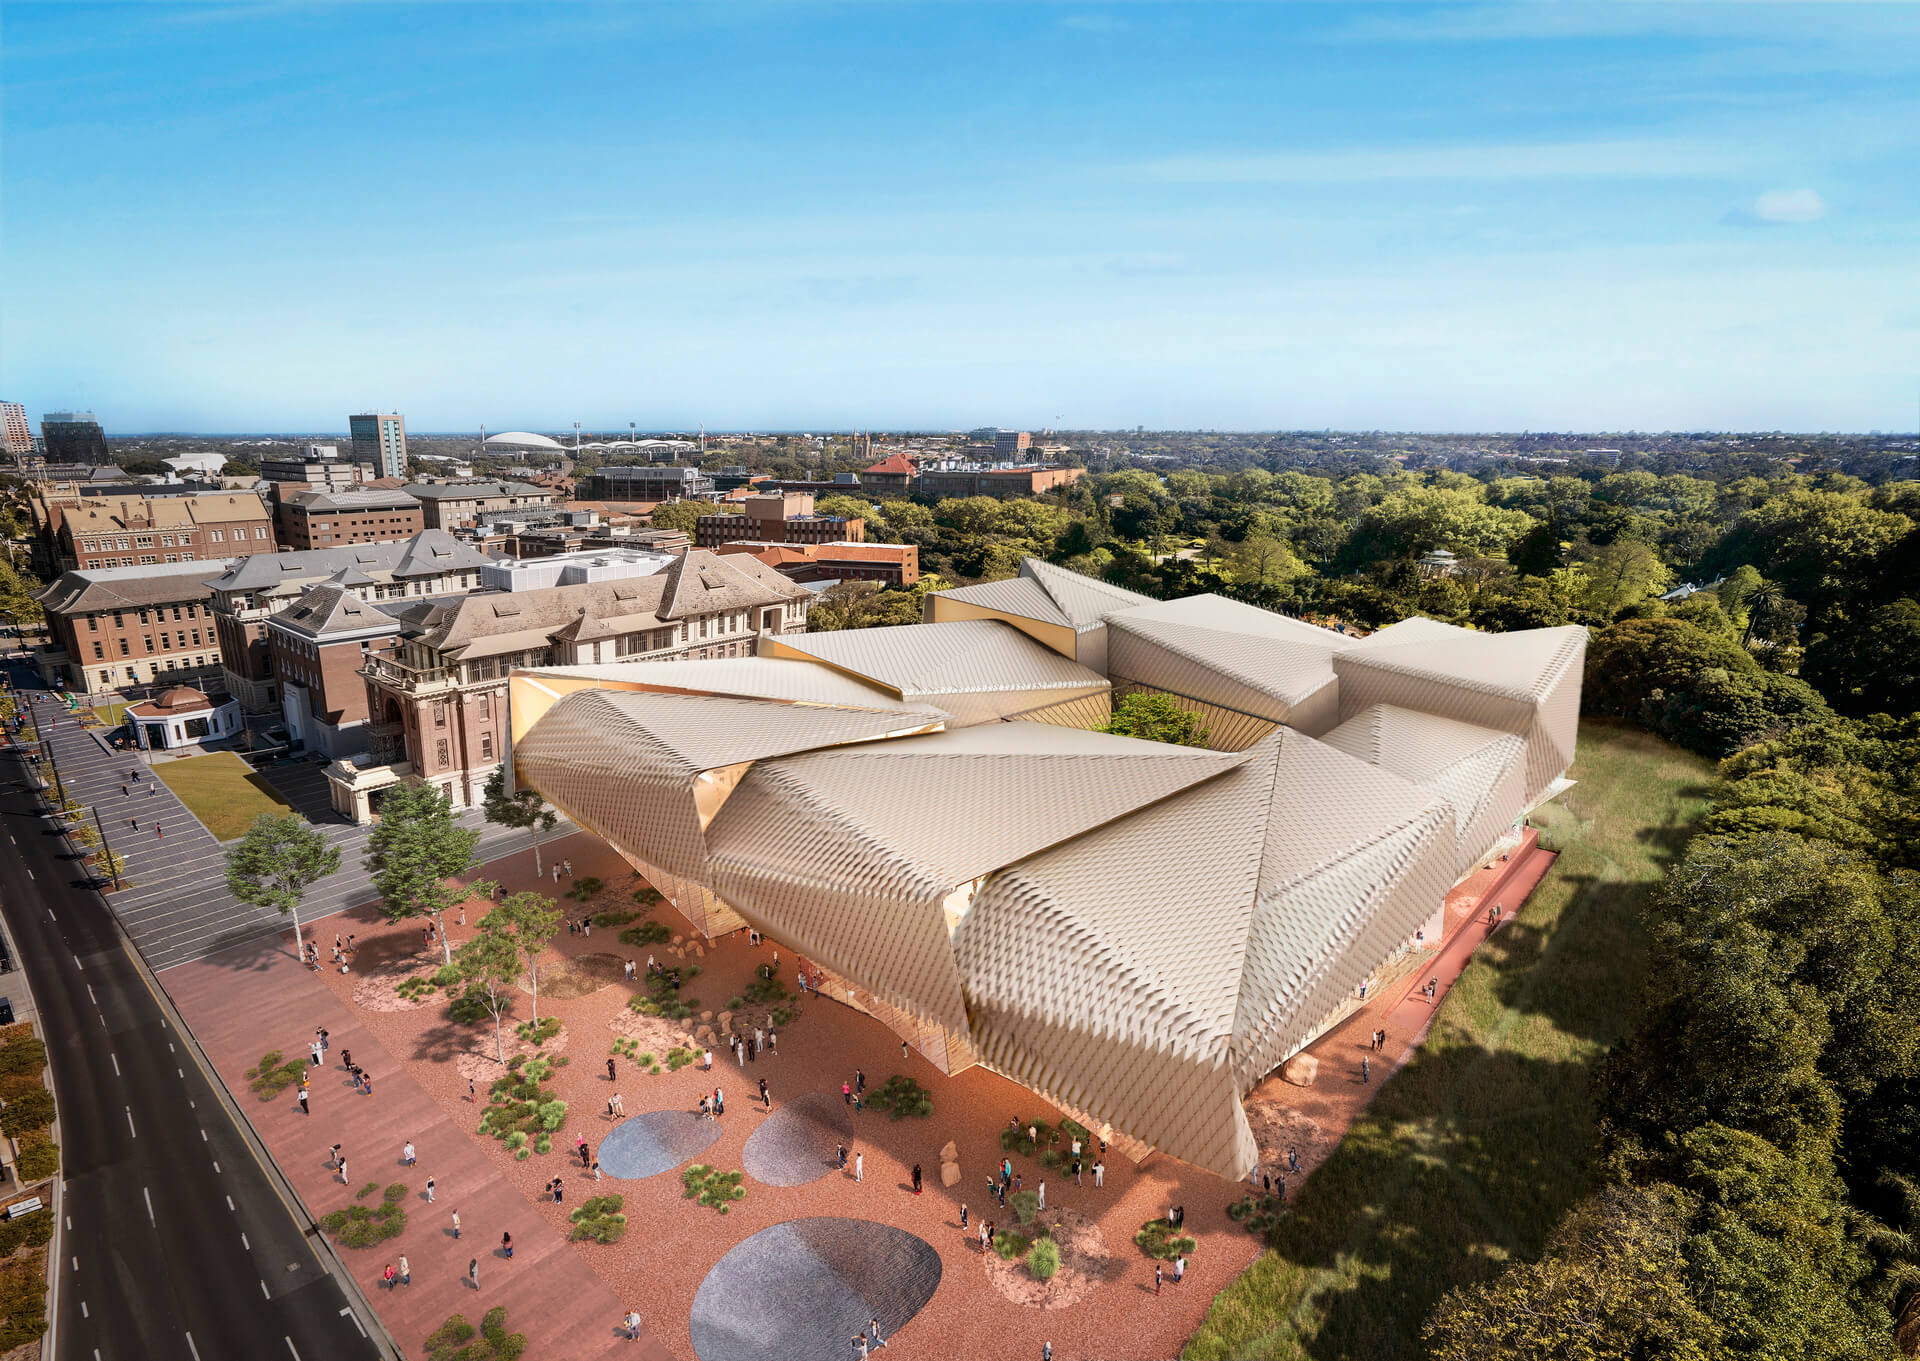 aerial view of a planned cultural center in adelaide, australia